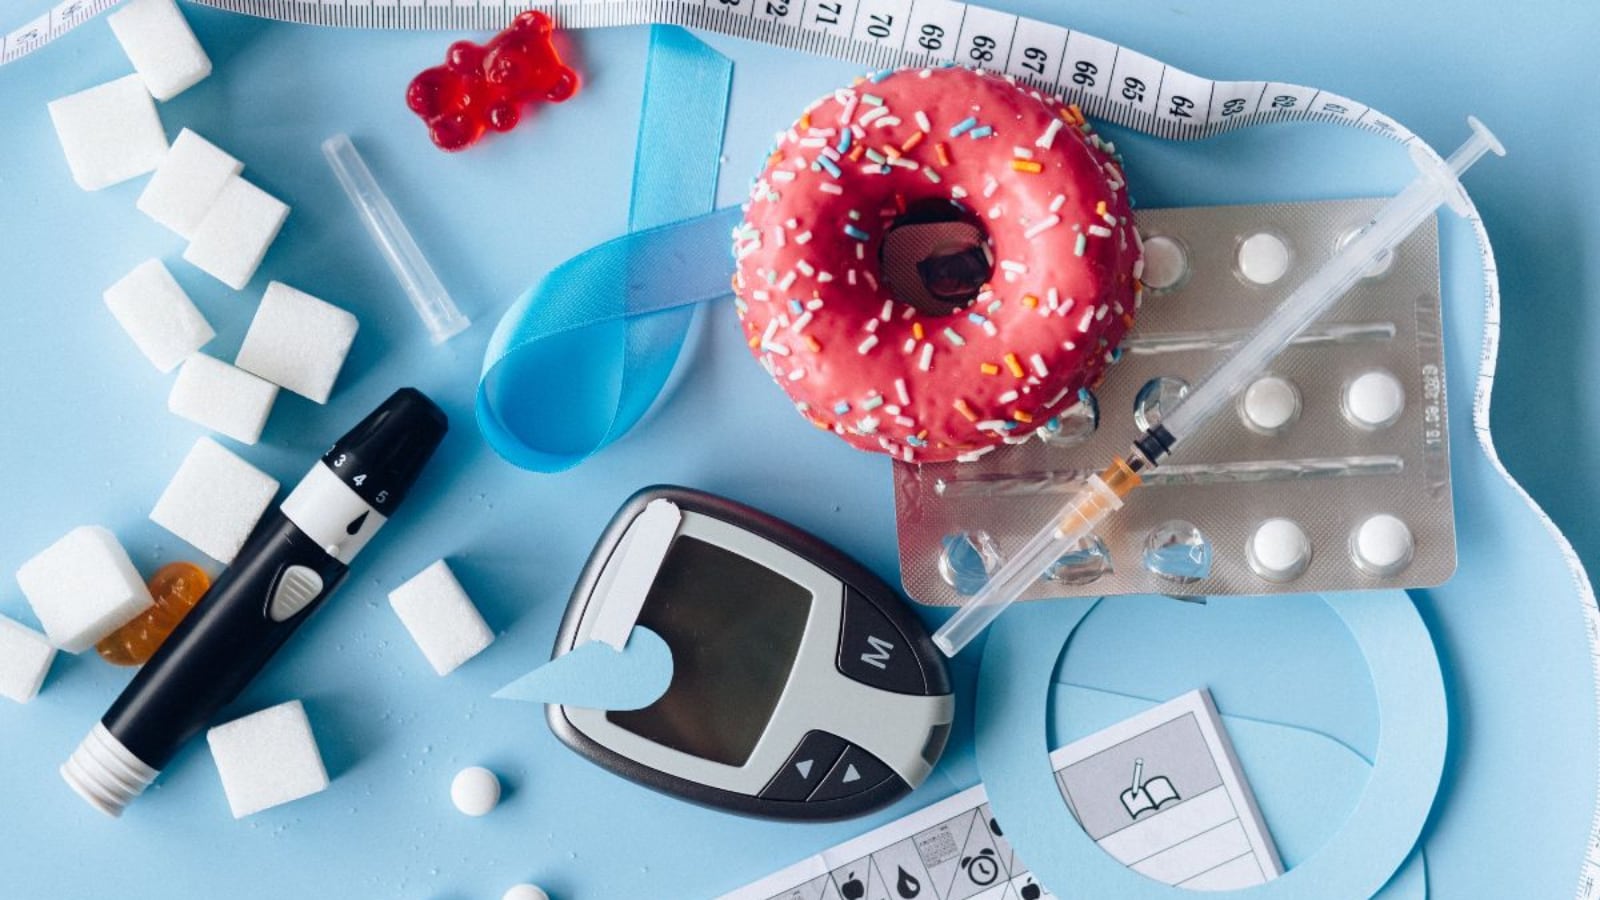 Diabetes Care: 4 Things to Keep in Mind Before Making a Diet Plan